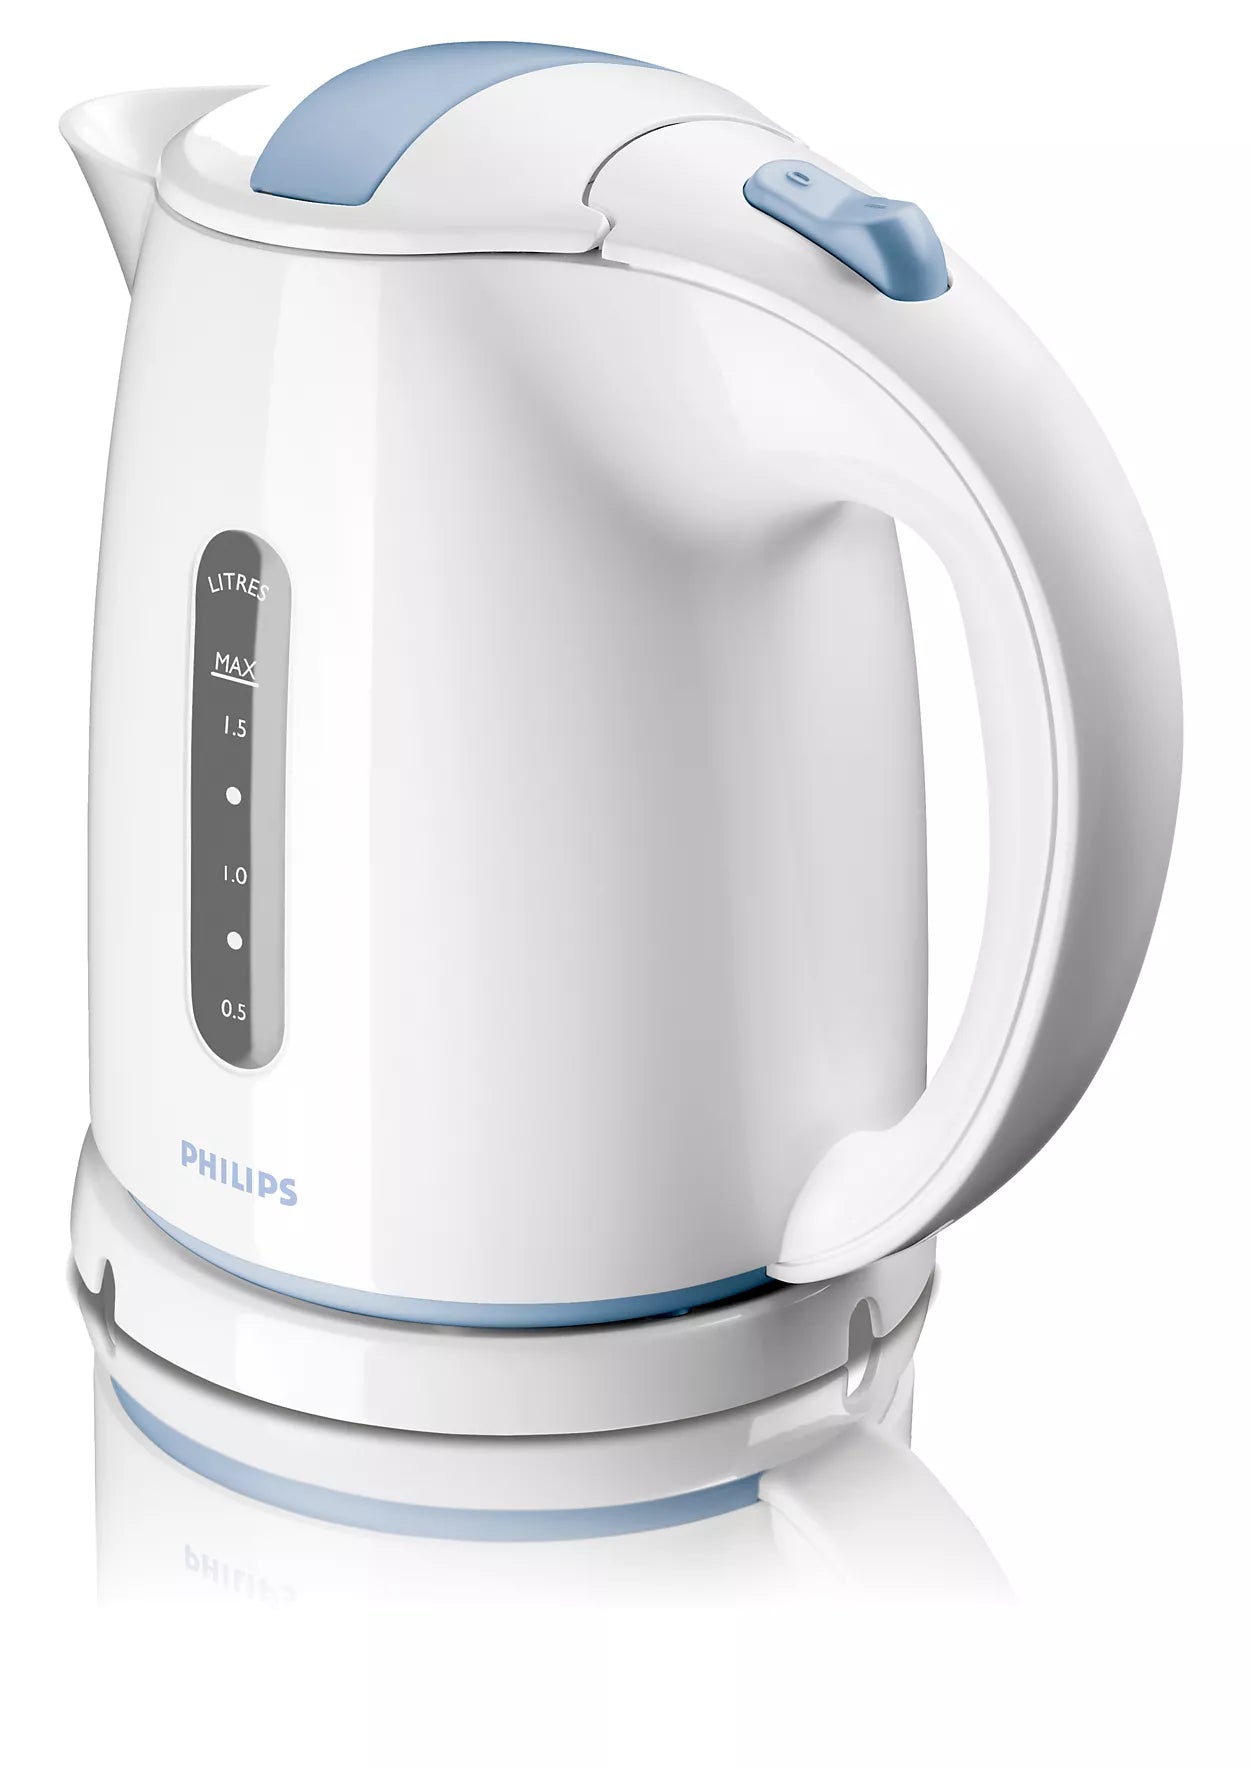 PHILIPS WATER KETTLE